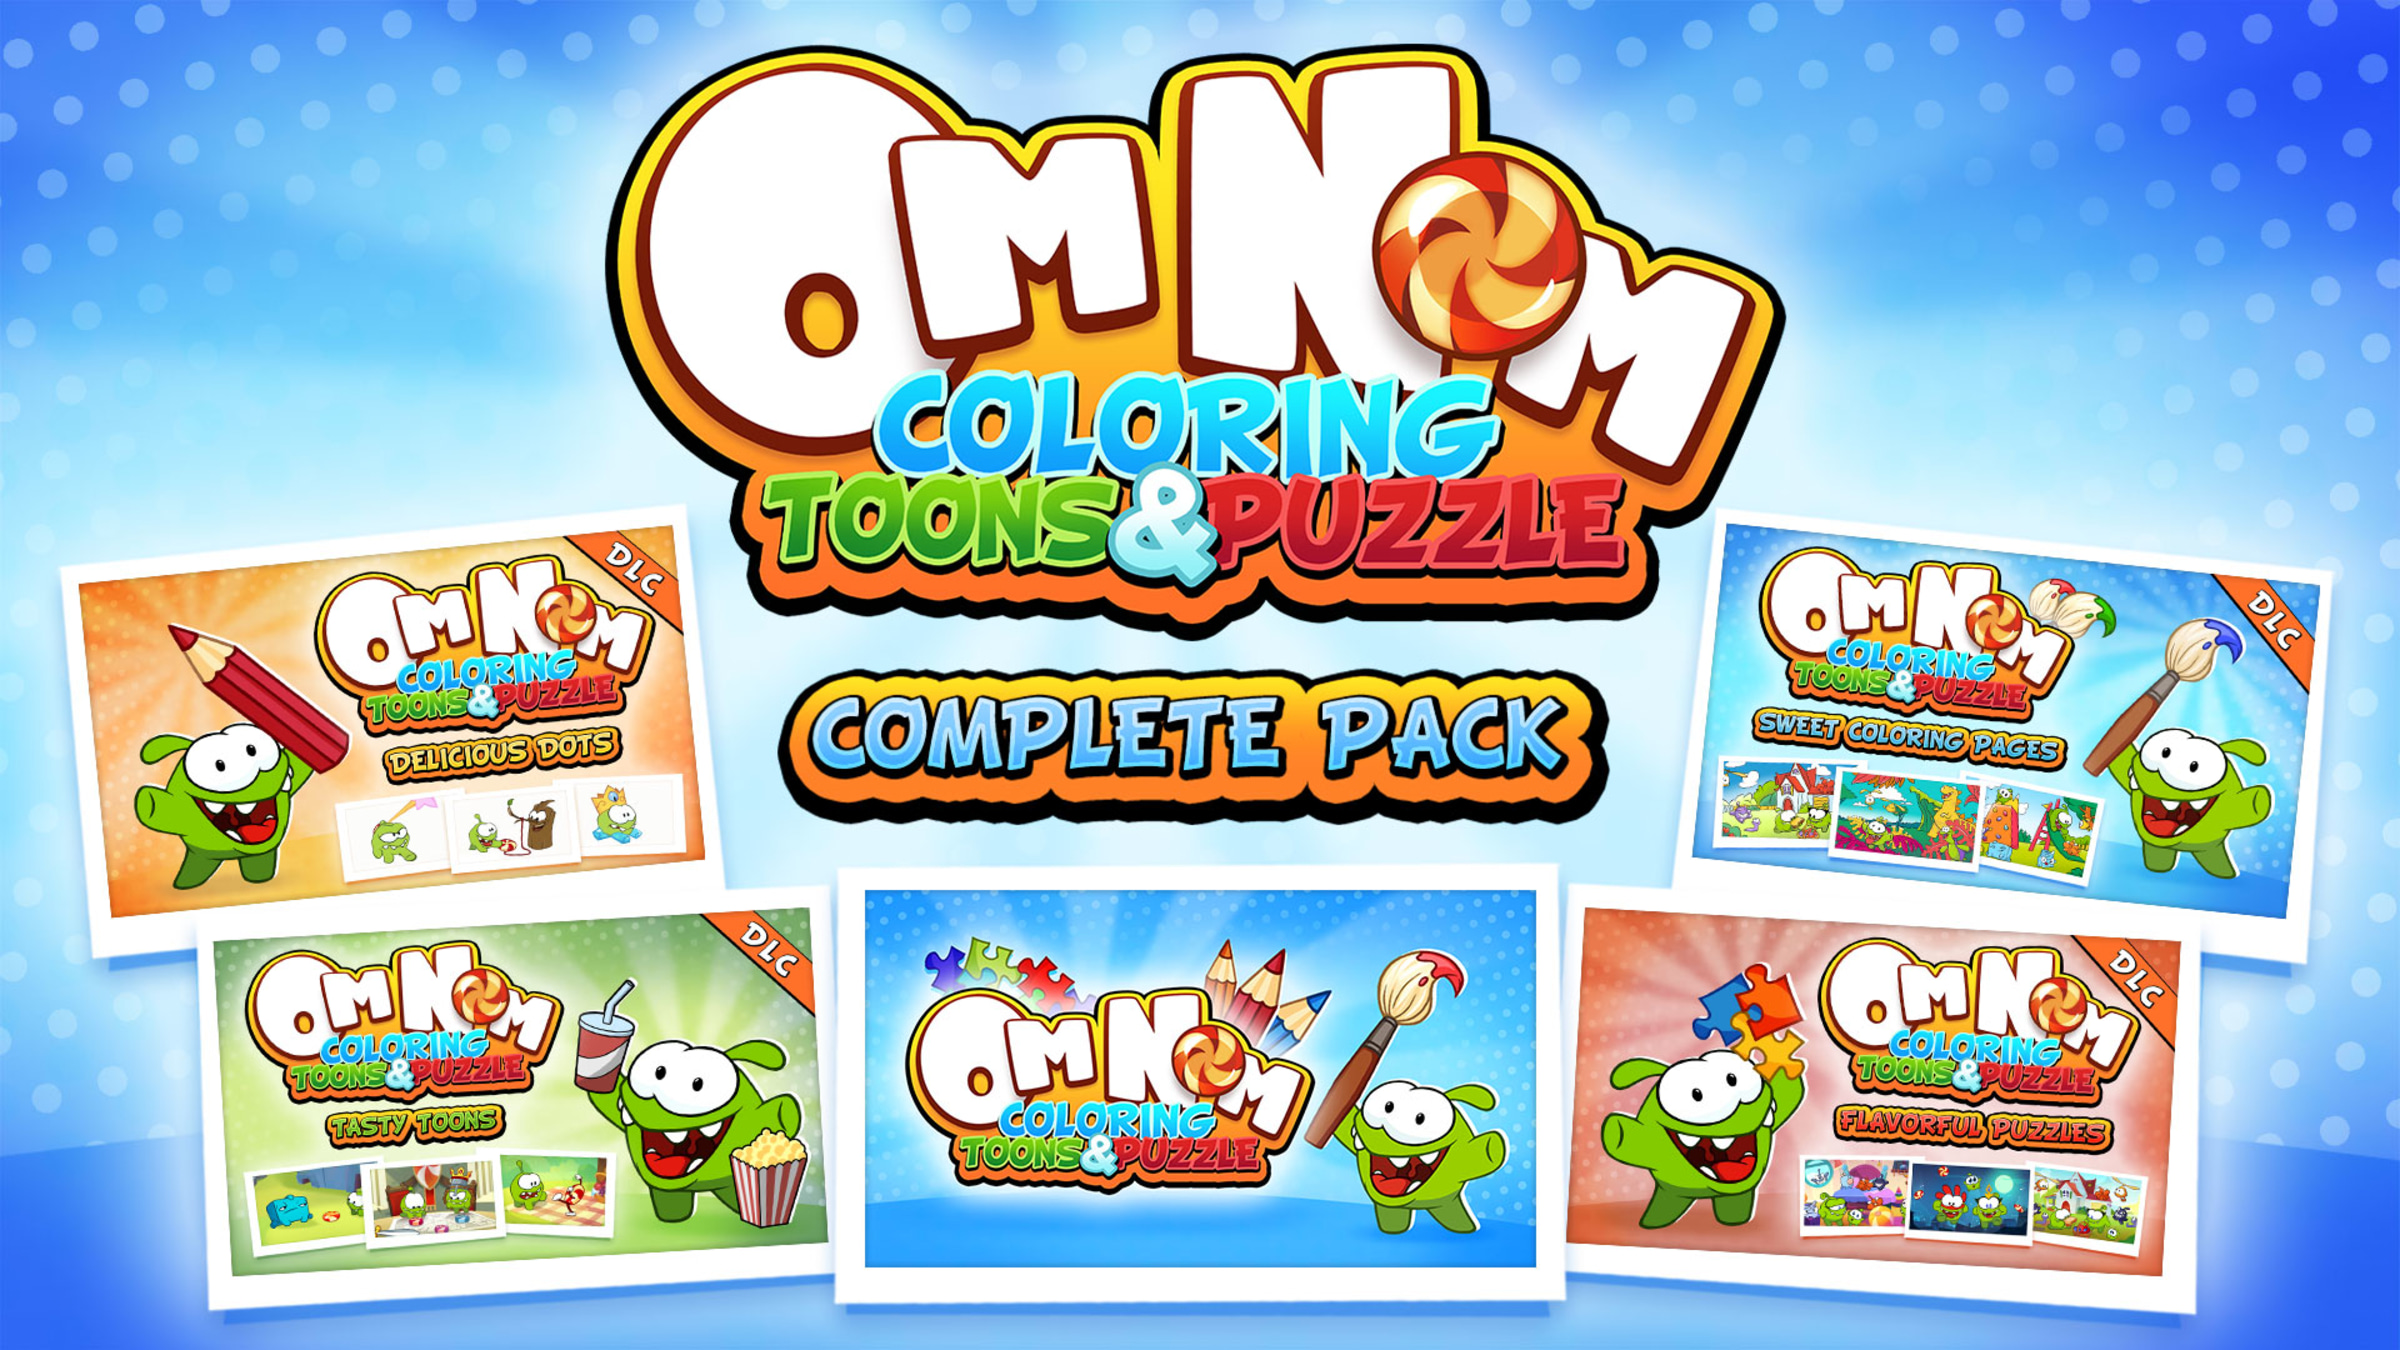 Om Nom: Flavorful Puzzles for Nintendo Switch - Nintendo Official Site